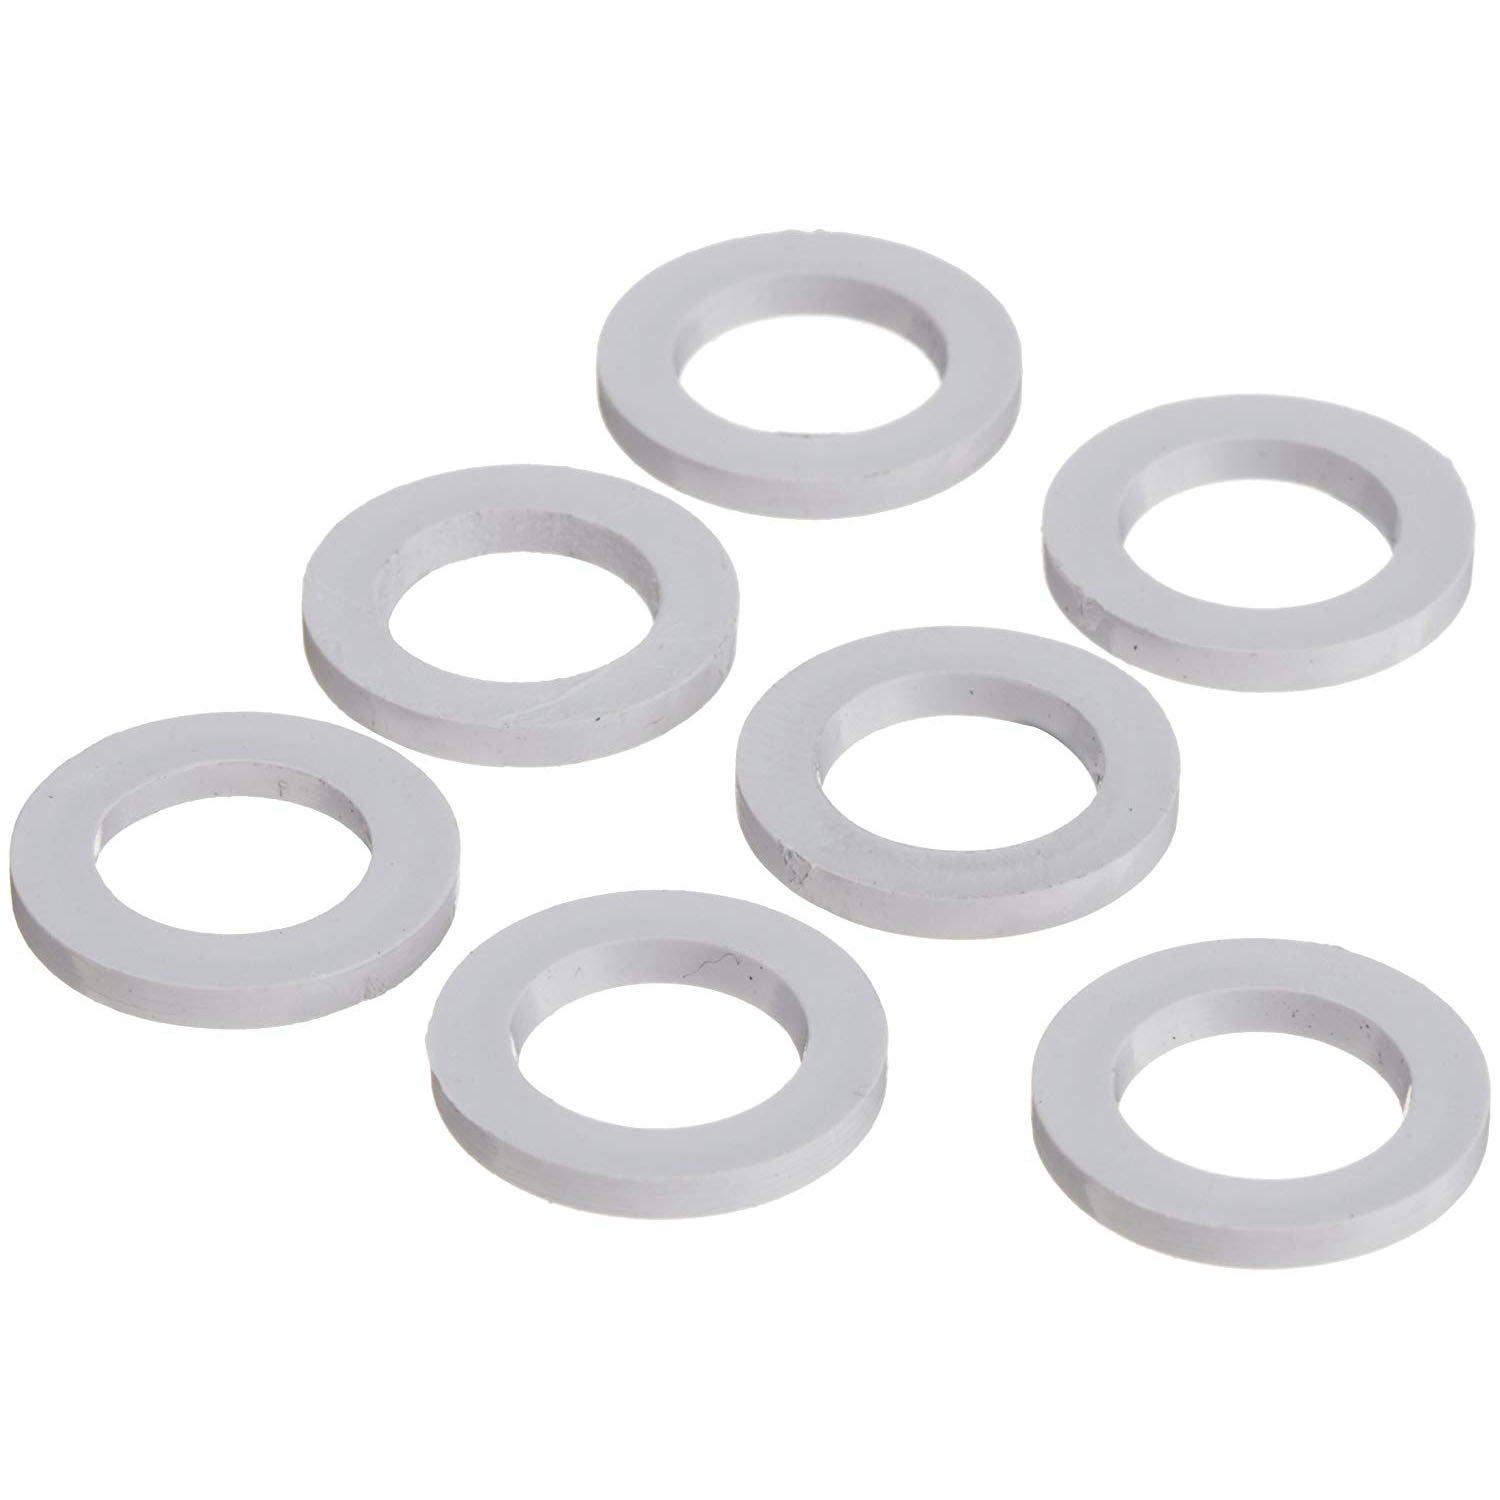 Pentair - Washer, 5/8in. OD, 3/8in. ID, 1/16in. , Plastic (Set of 8)